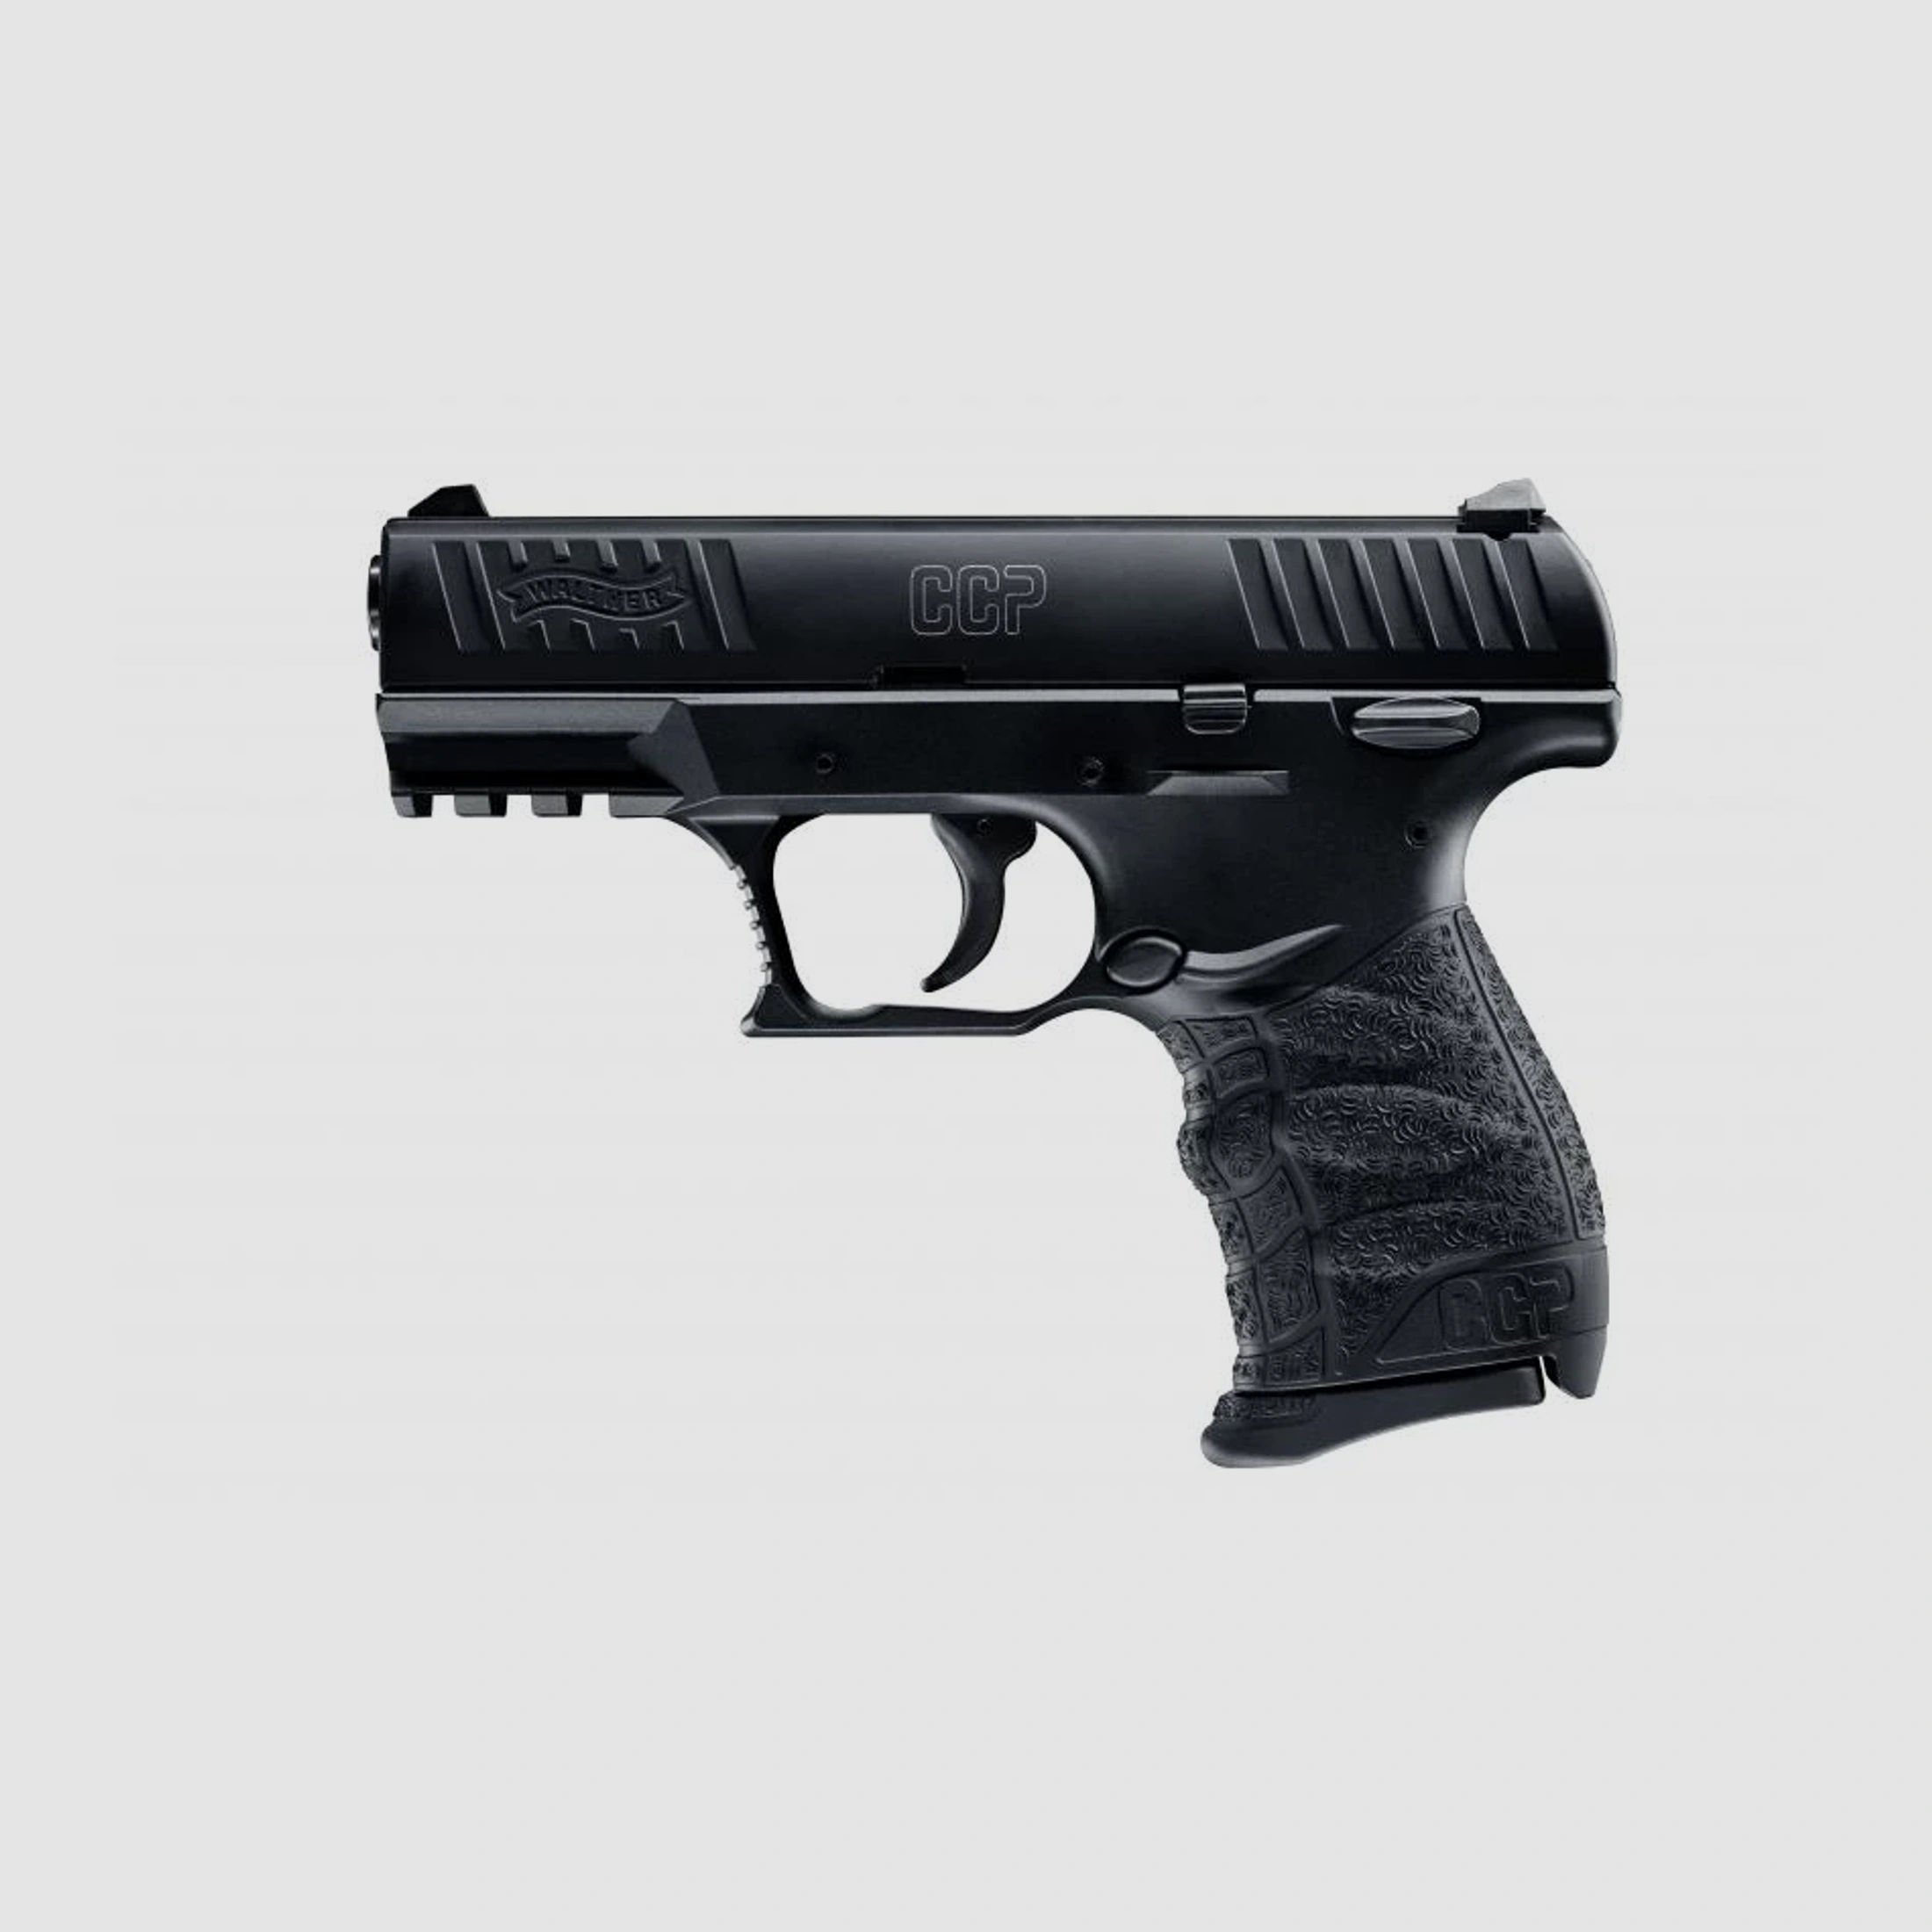 Walther CCP 9mmx19